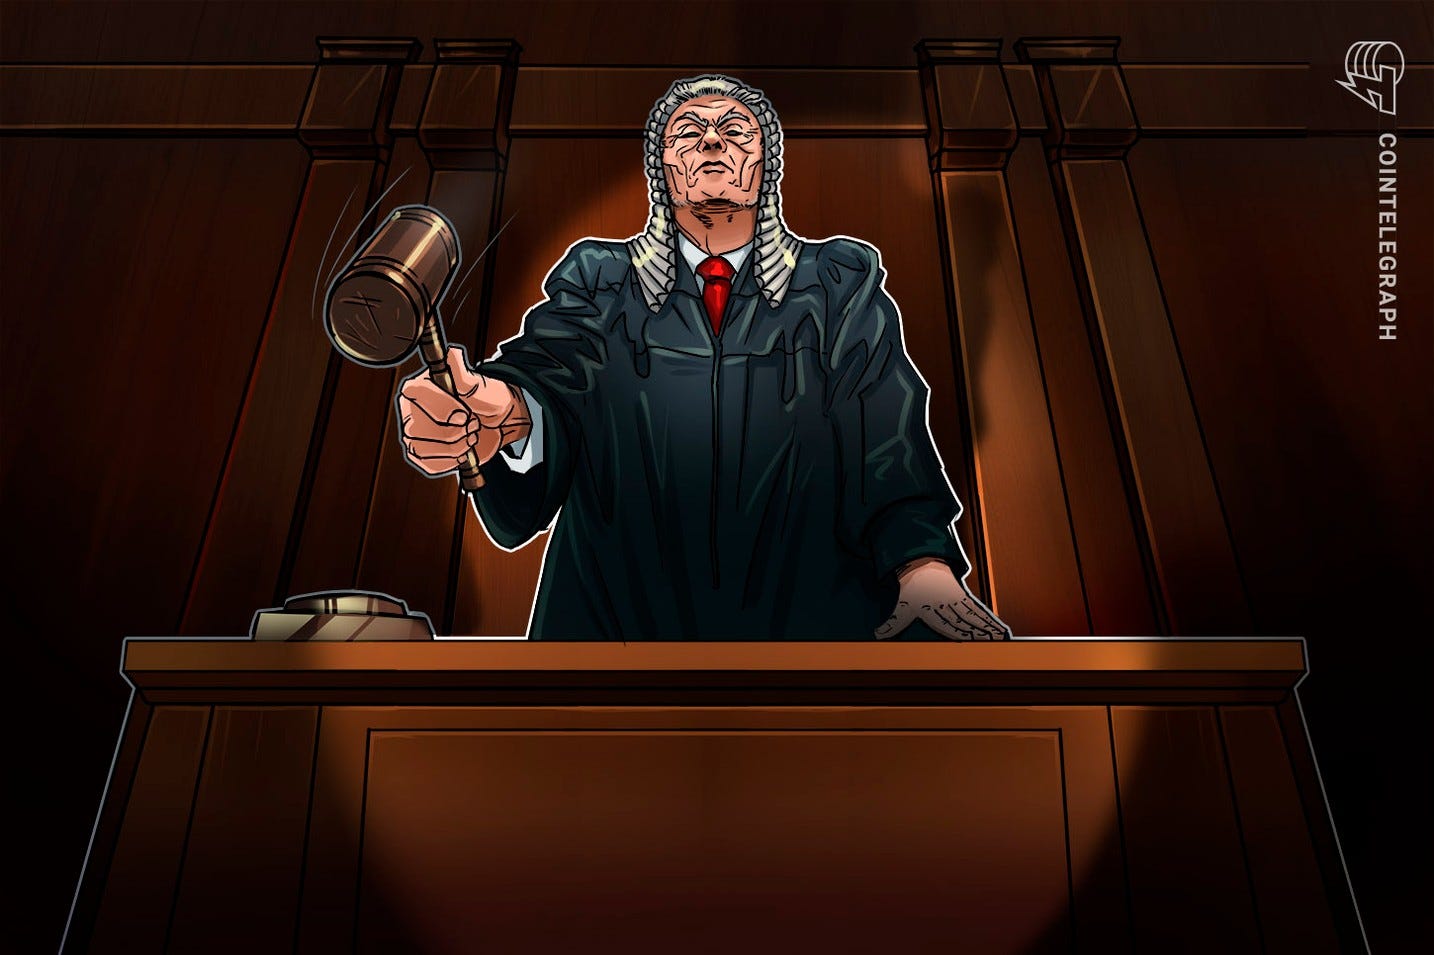 Breaking: Court victory for Ripple as judge denies SEC motion to seal Hinman docs